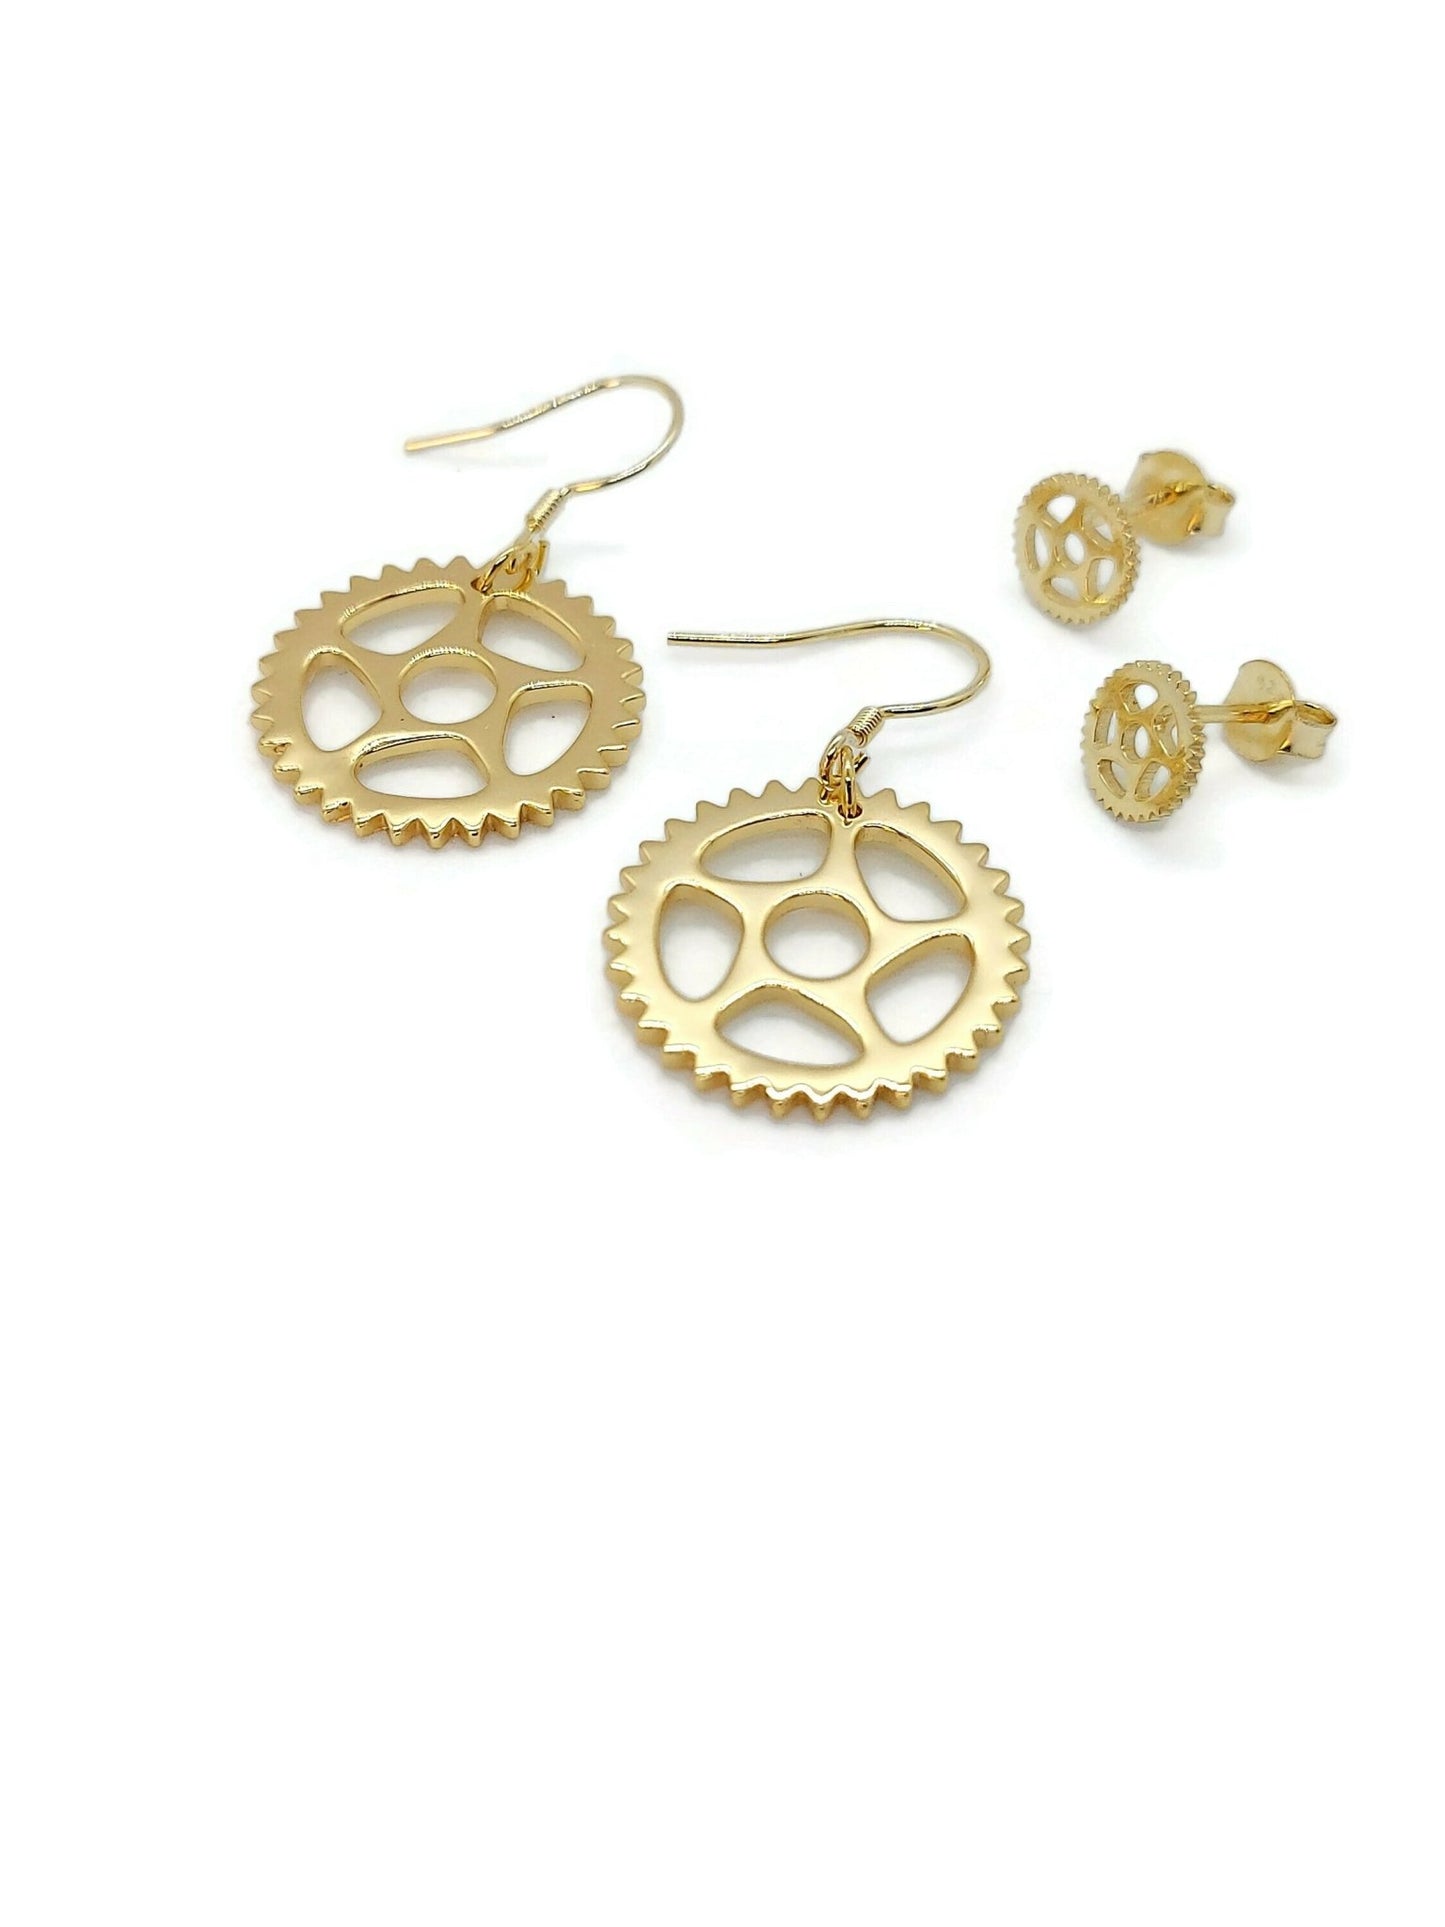 18 gold plated bike chain ring design dangle earrings and stud earring with a white background